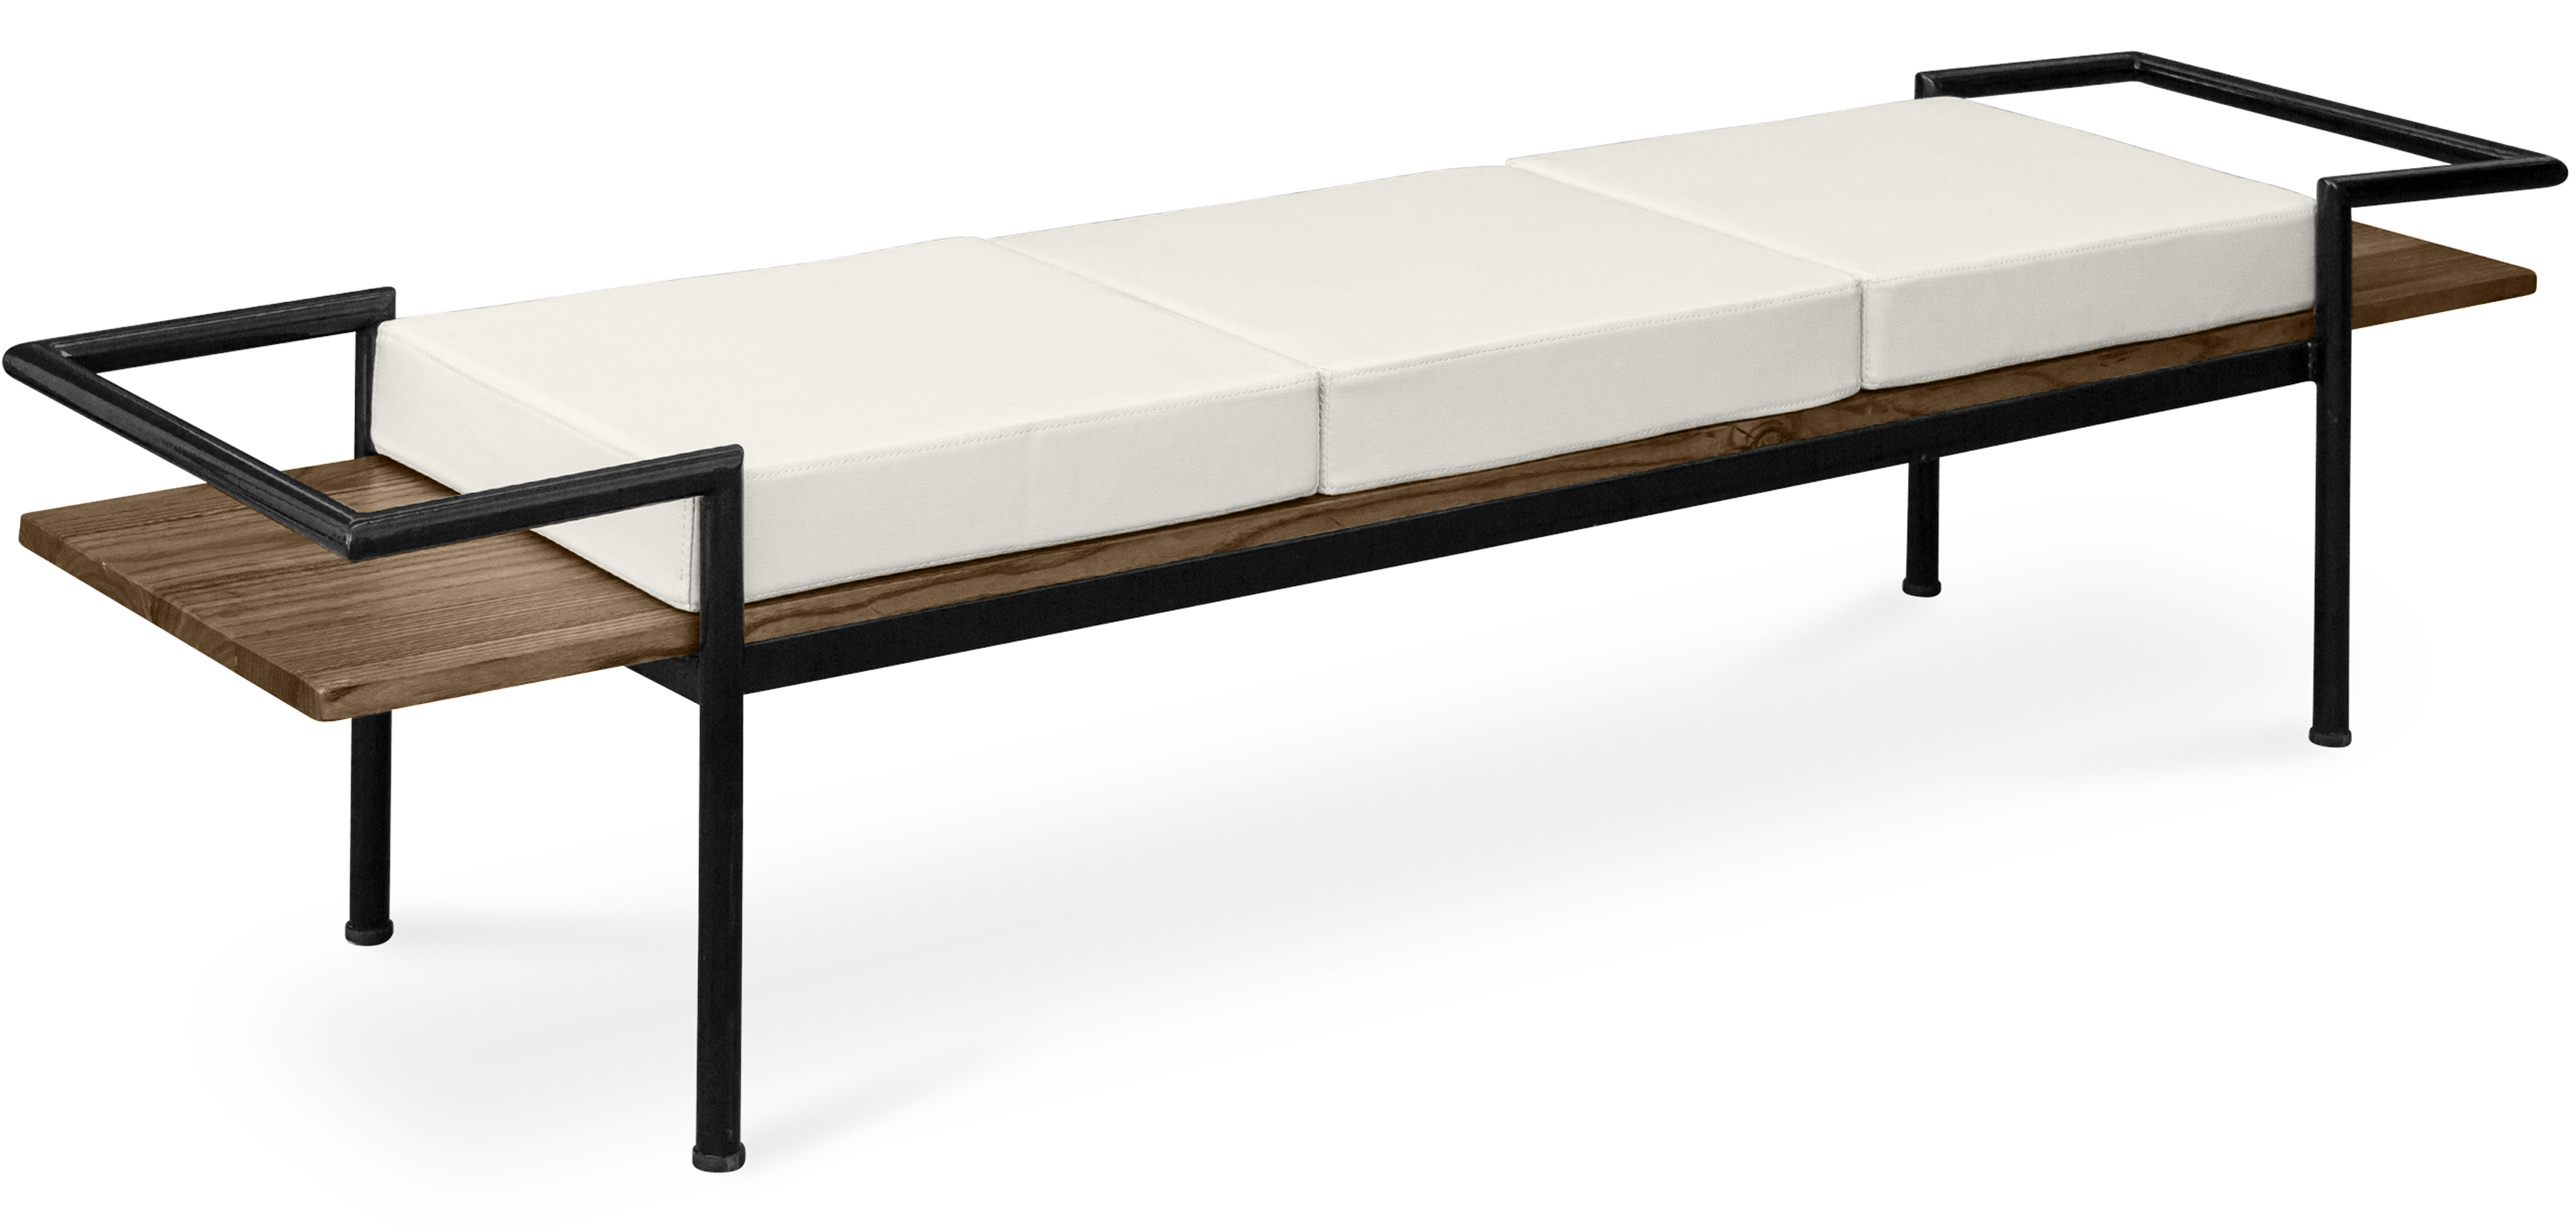 Buy Scandinavian style bench with cushions - Wood and metal Cream 59298 - in the EU